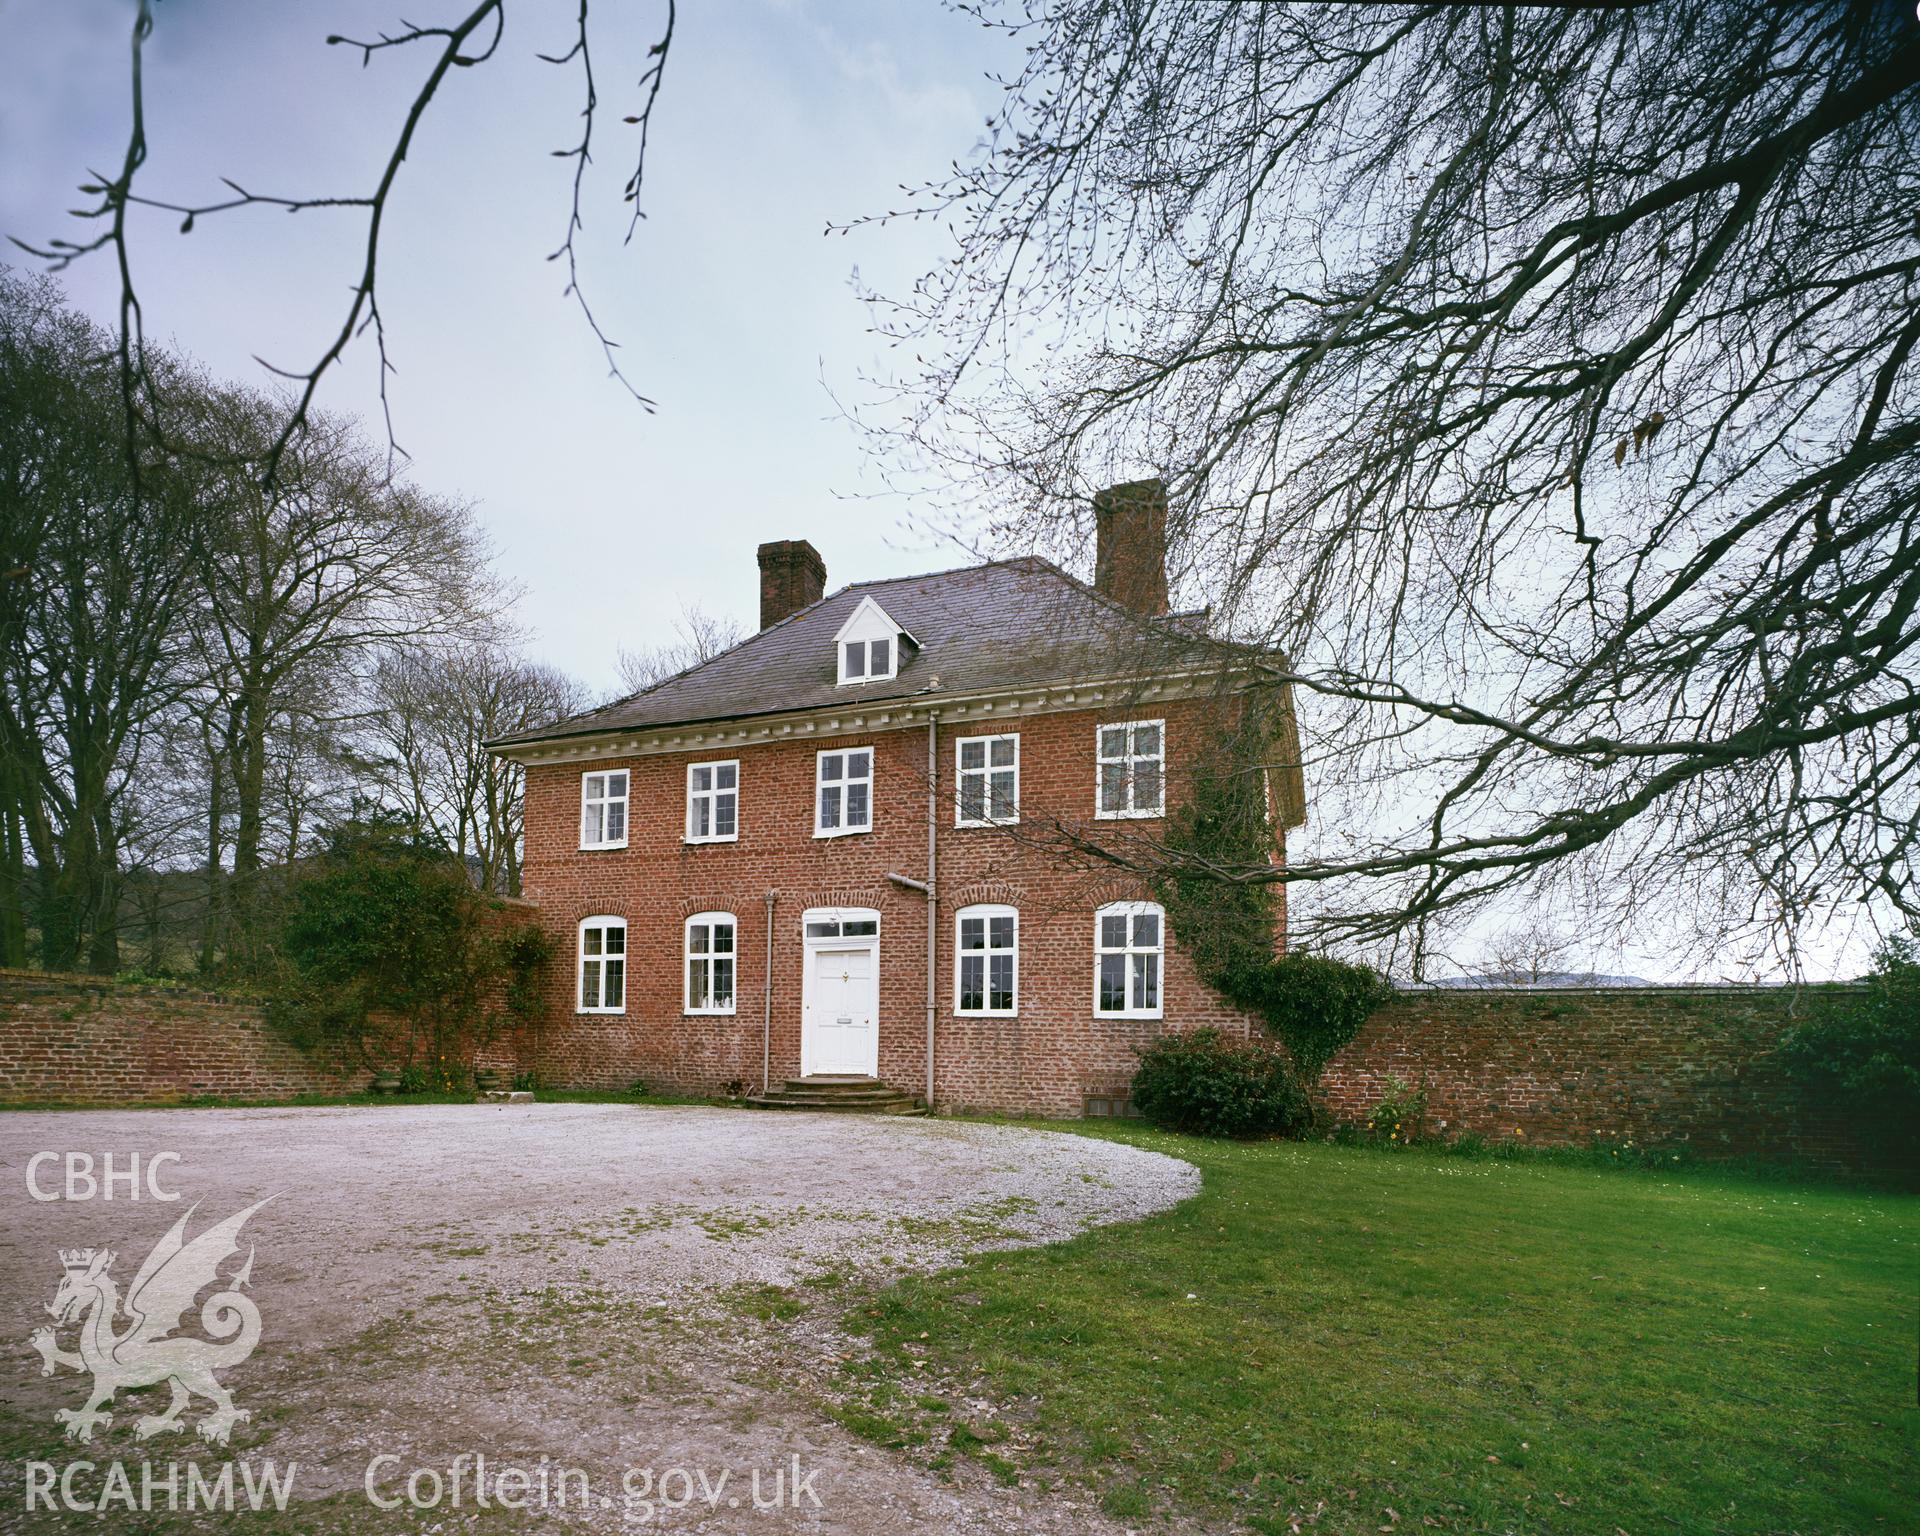 RCAHMW colour transparency showing view of Old Rectory, Llanbedr Dyffryn Clwyd.